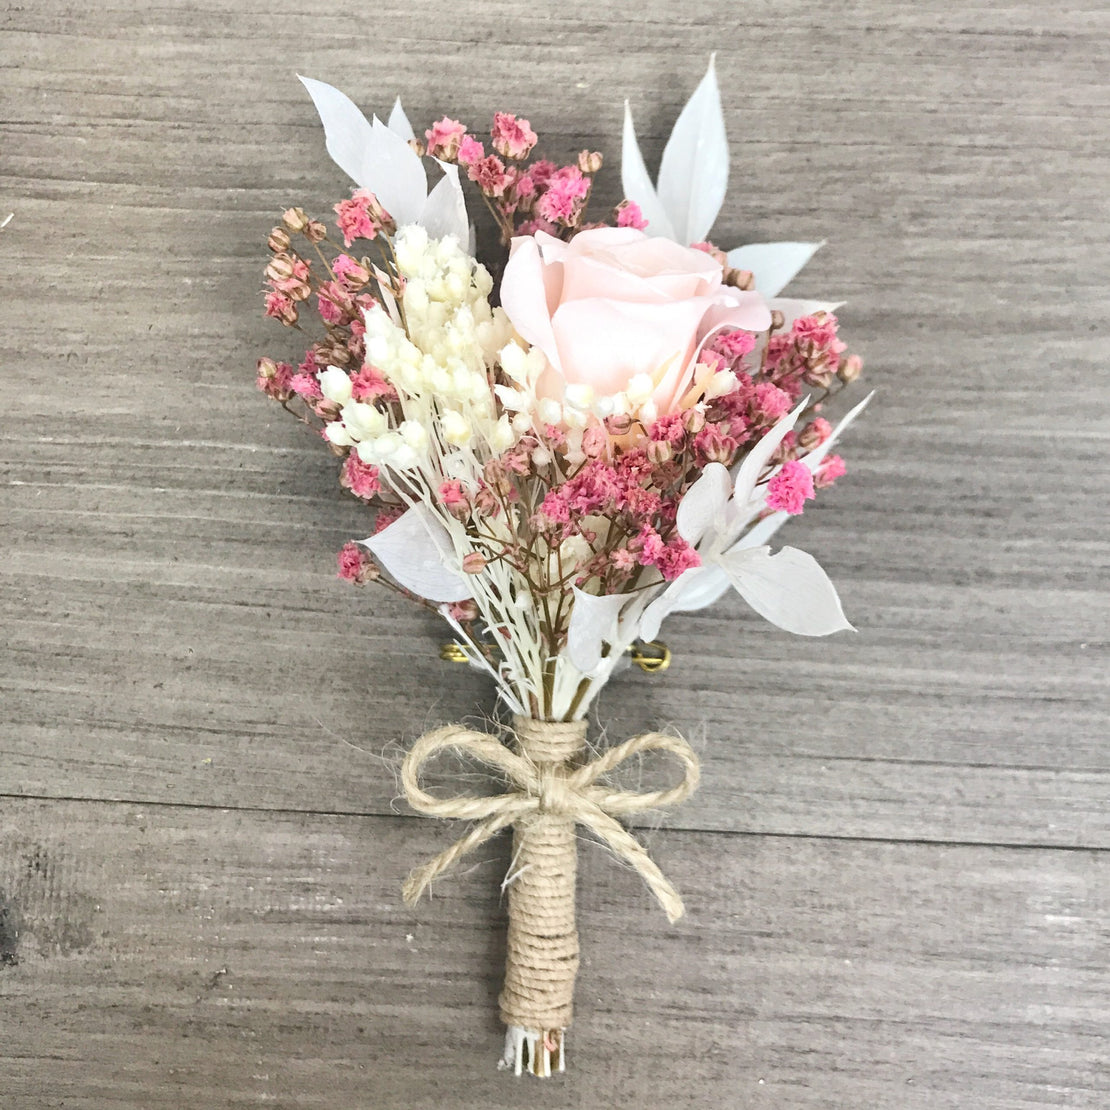 Dried flower wedding boutonniere with rose and stabilized pink gypsophila